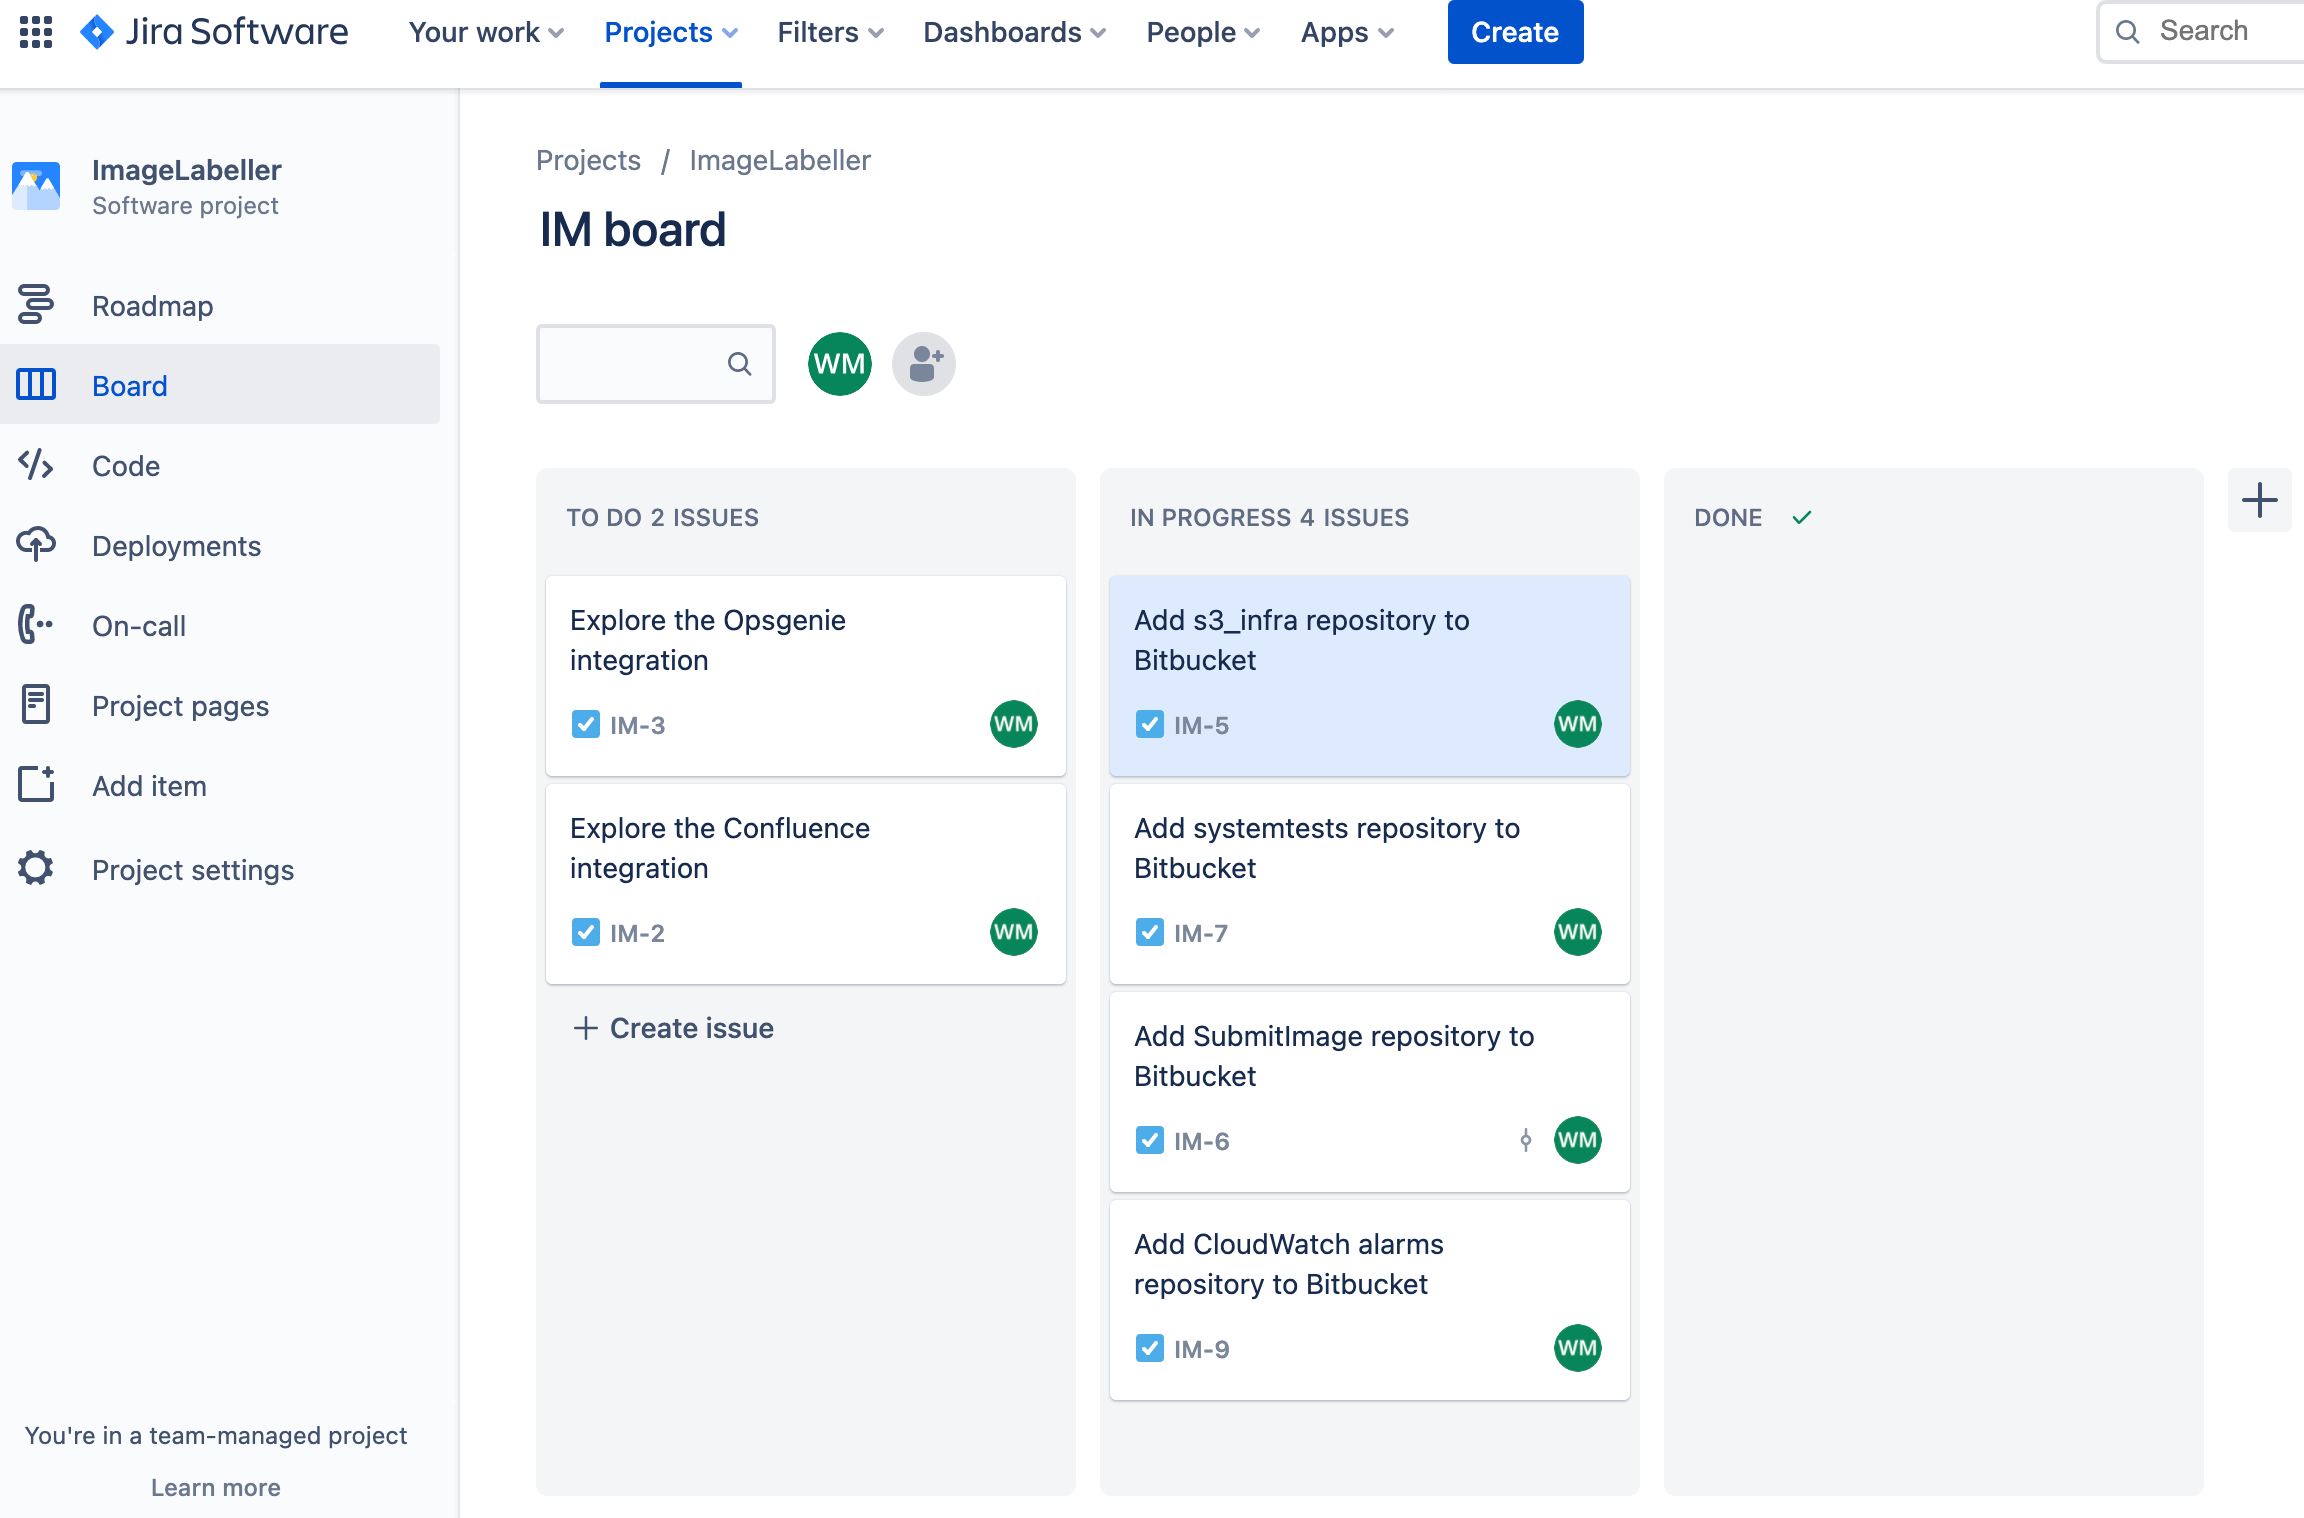 Step 1 in adding an automation in Jira on Jira project page